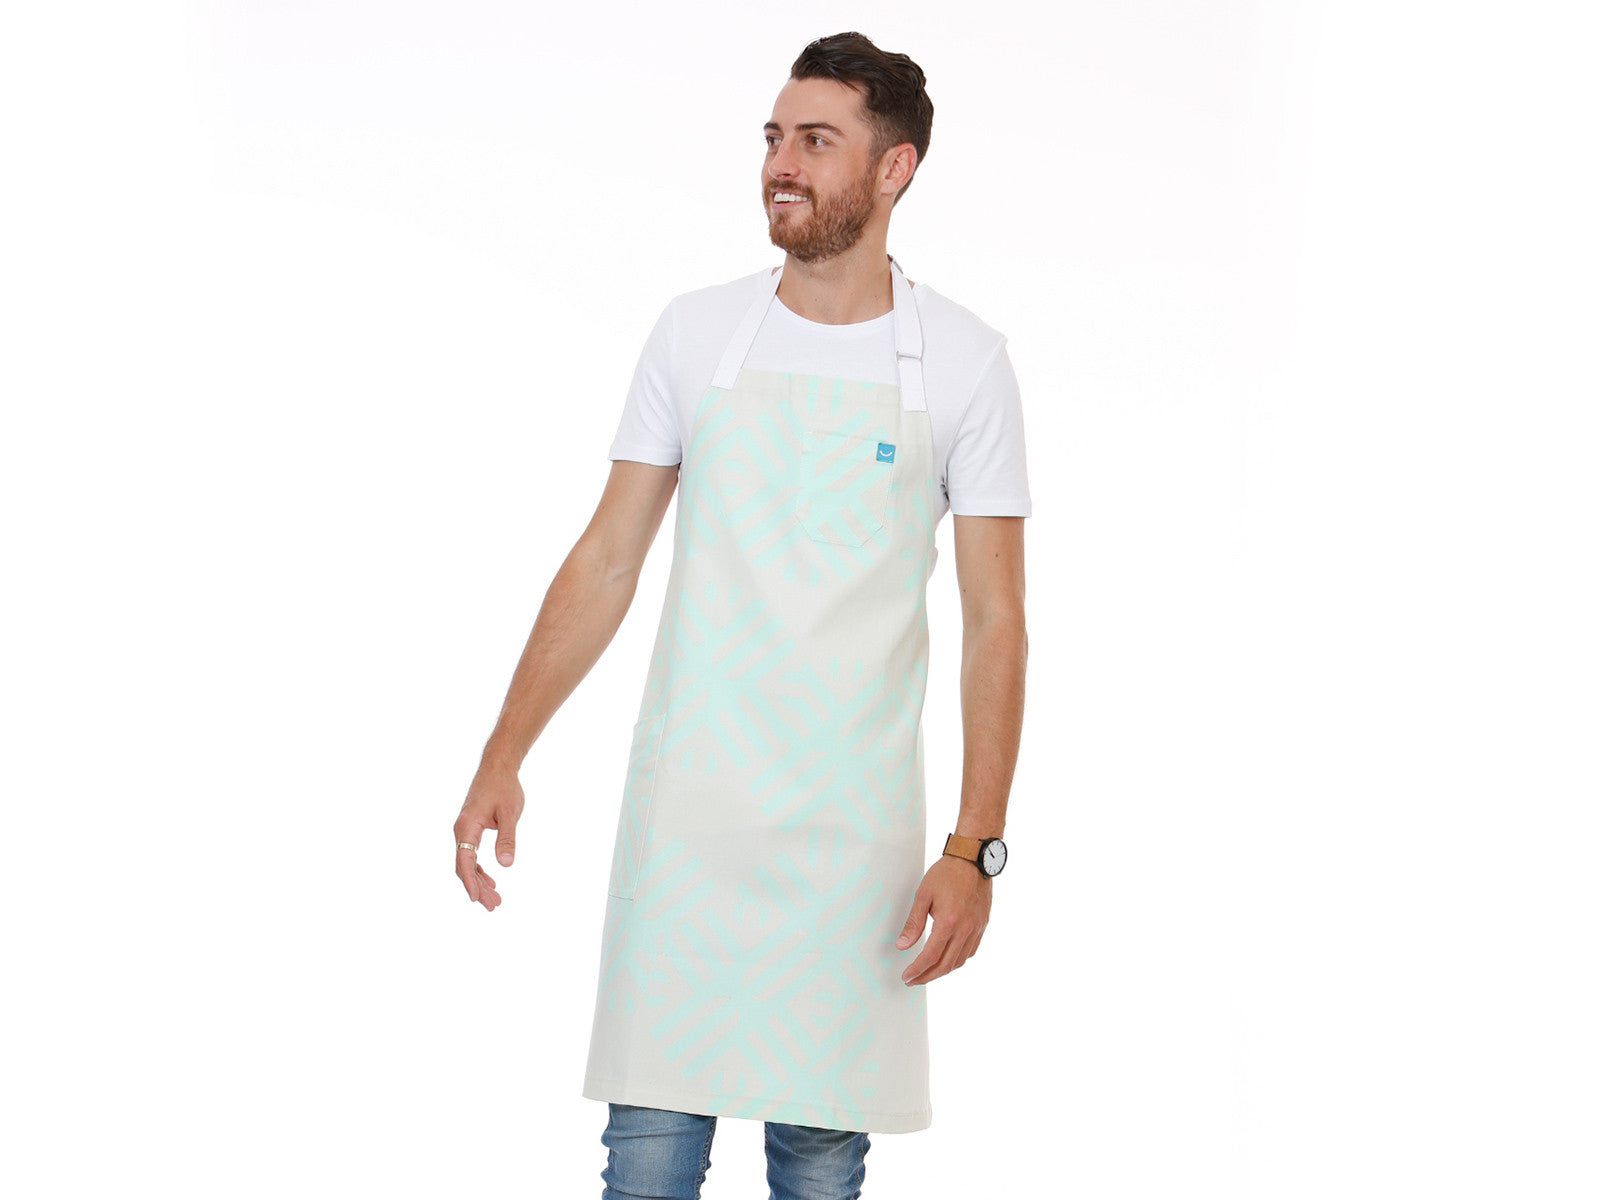 Peppermint Apron - Nice Aprons